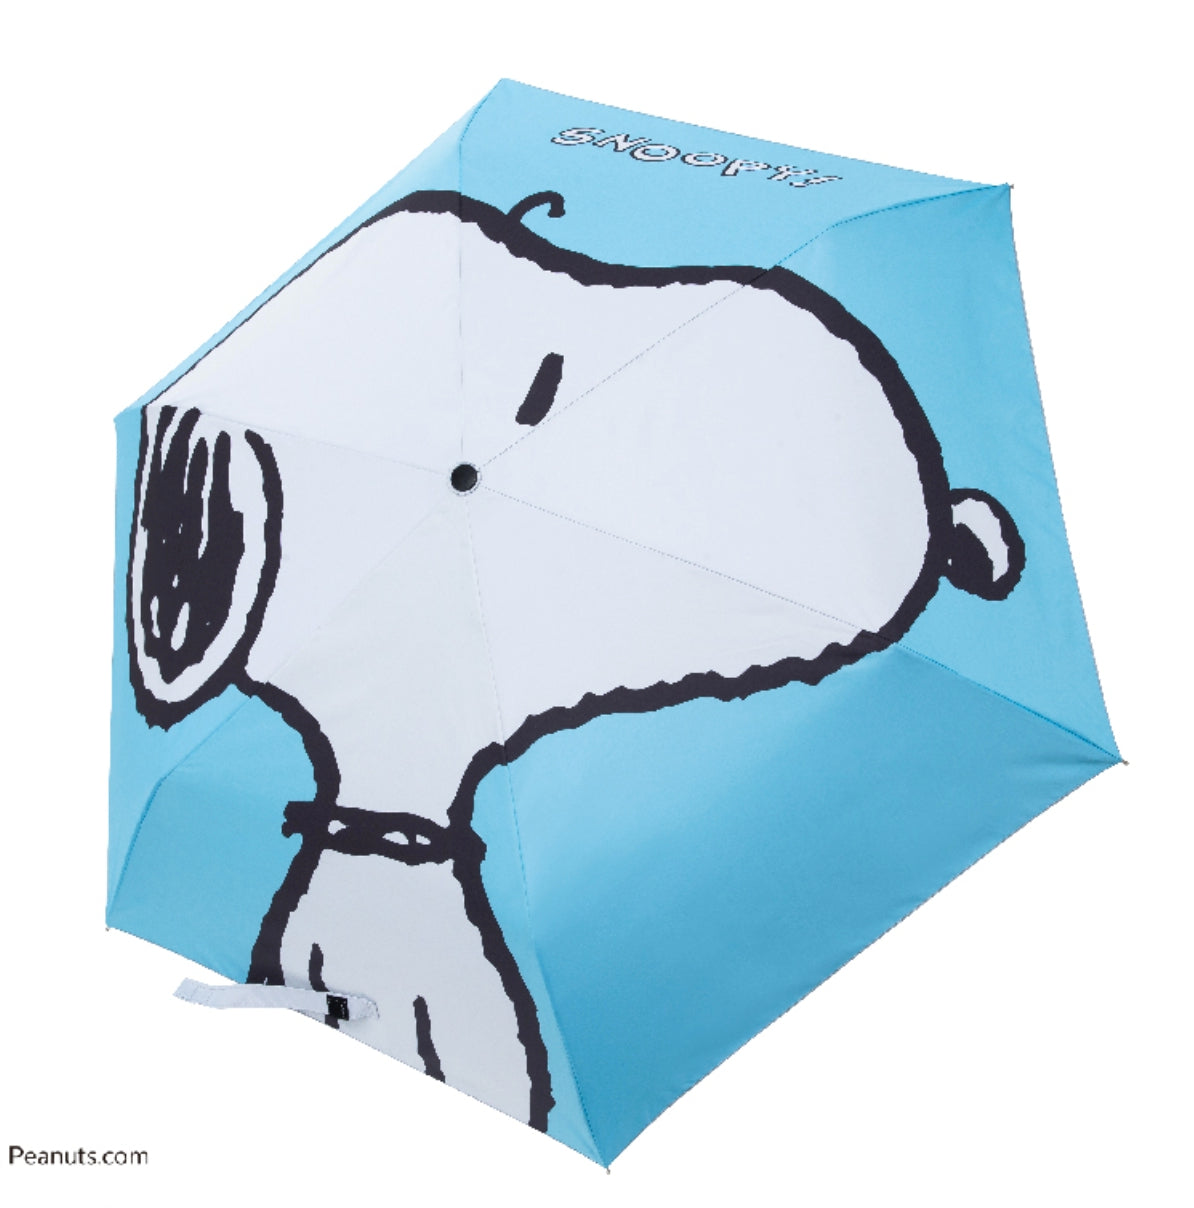 Peanuts Snoopy & Friends Taiwan Cosmed Limited Umbrella